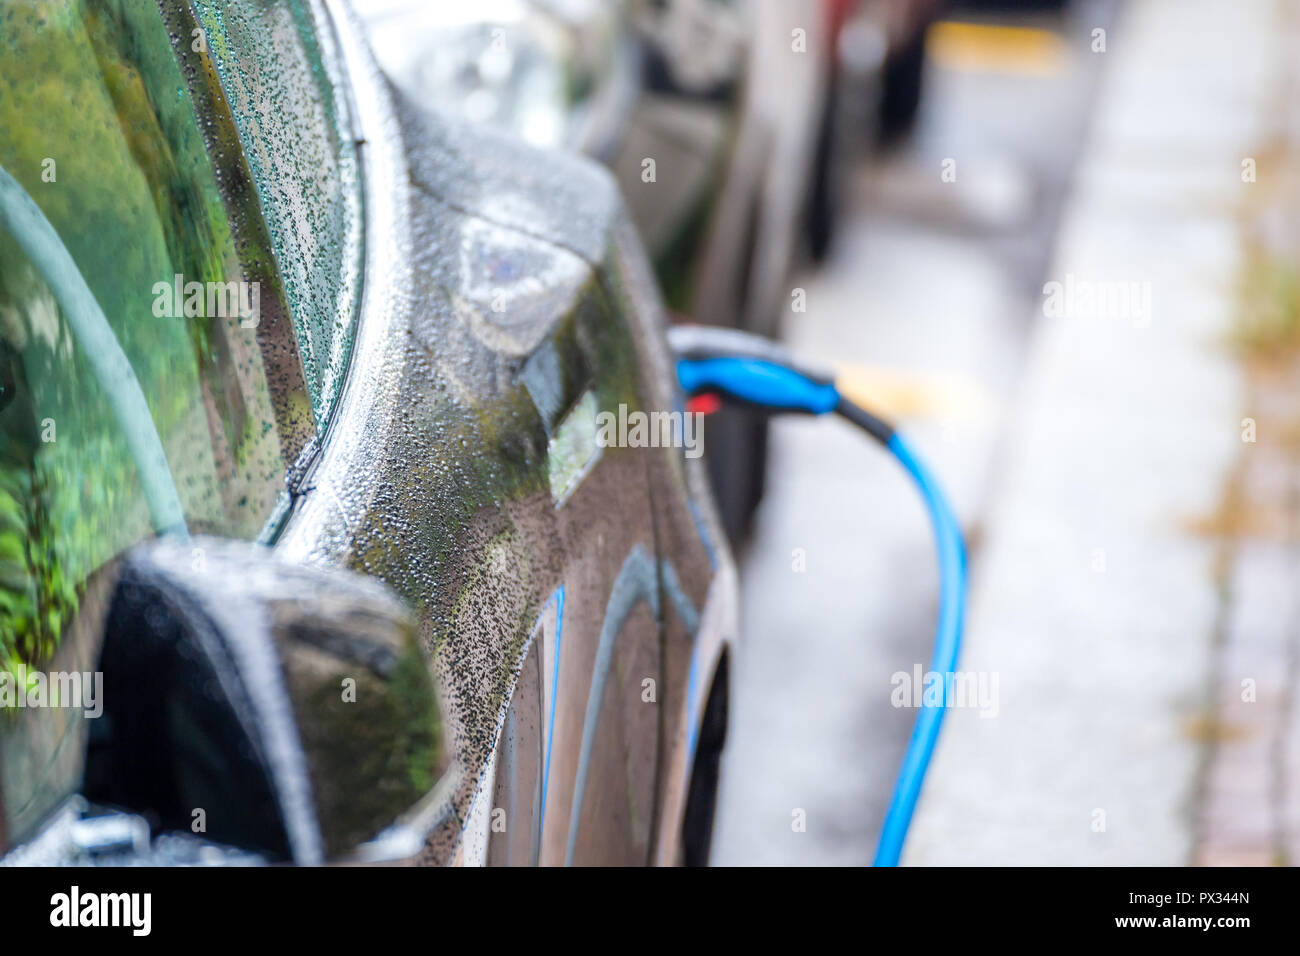 raindrops wetting car while charging plugged into a power station on a street Stock Photo